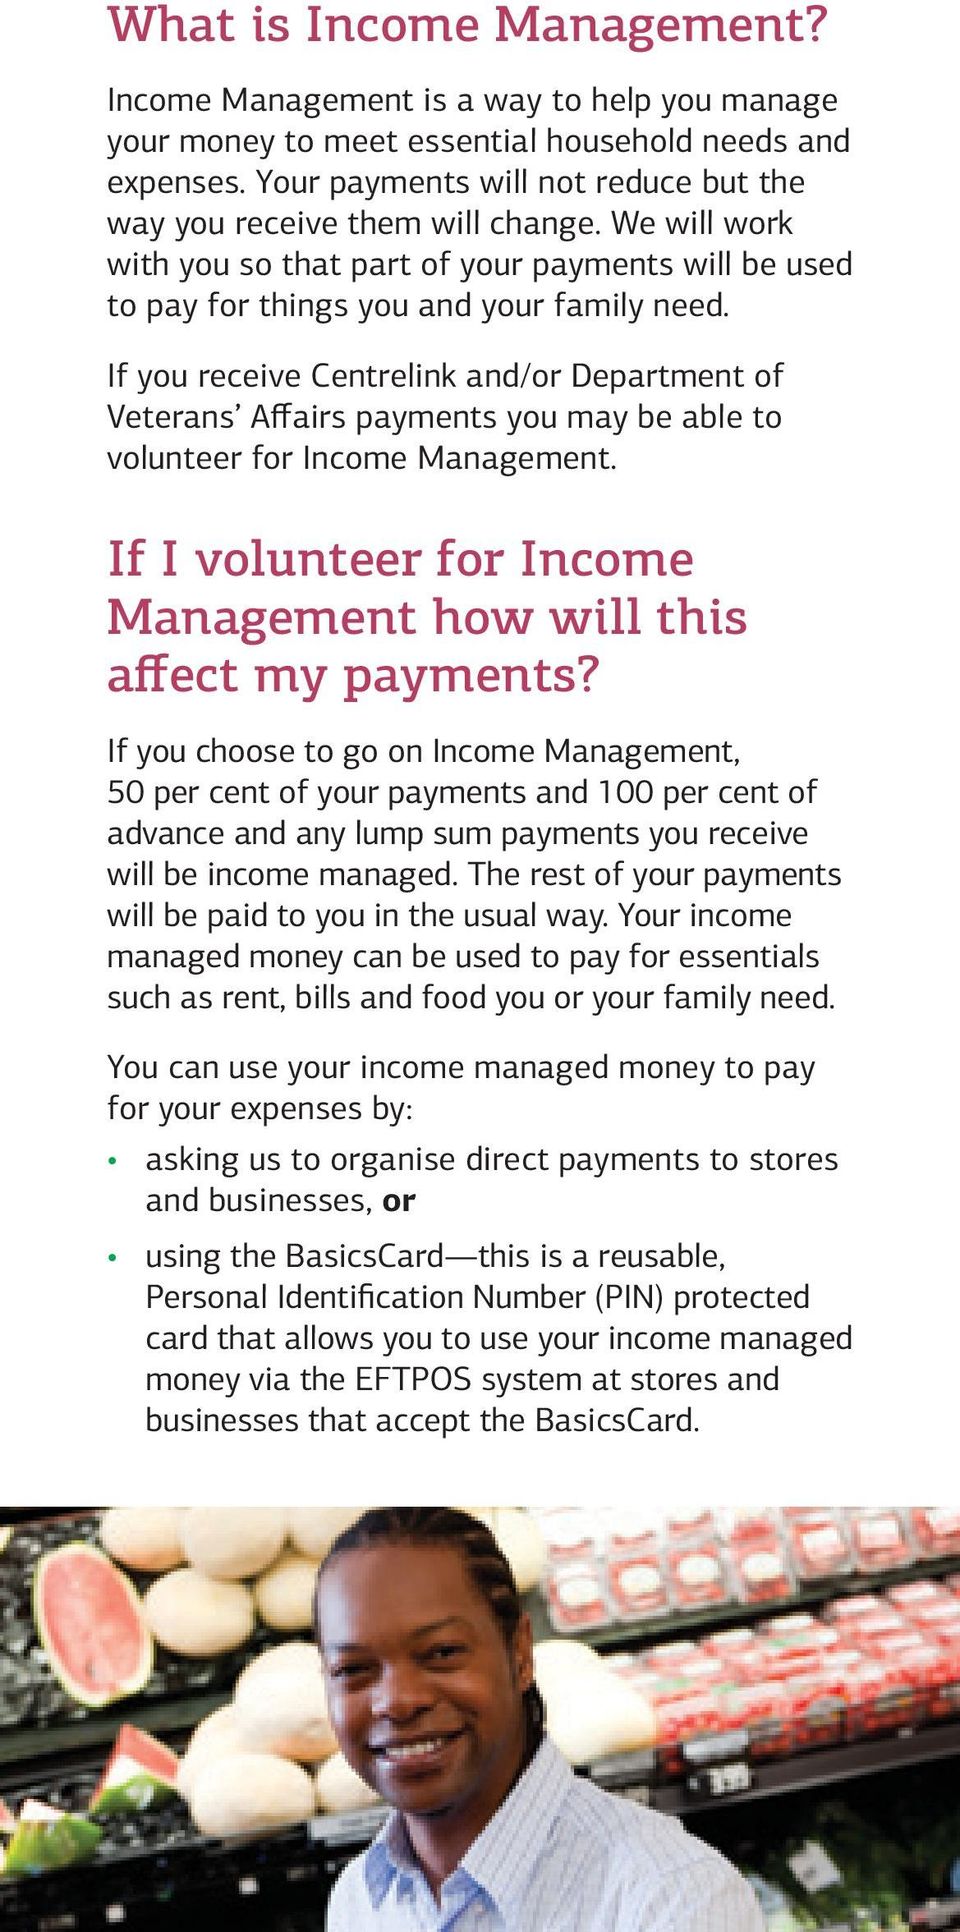 If you receive and/or Department of Veterans Affairs payments you may be able to volunteer for Income Management. If I volunteer for Income Management how will this affect my payments?